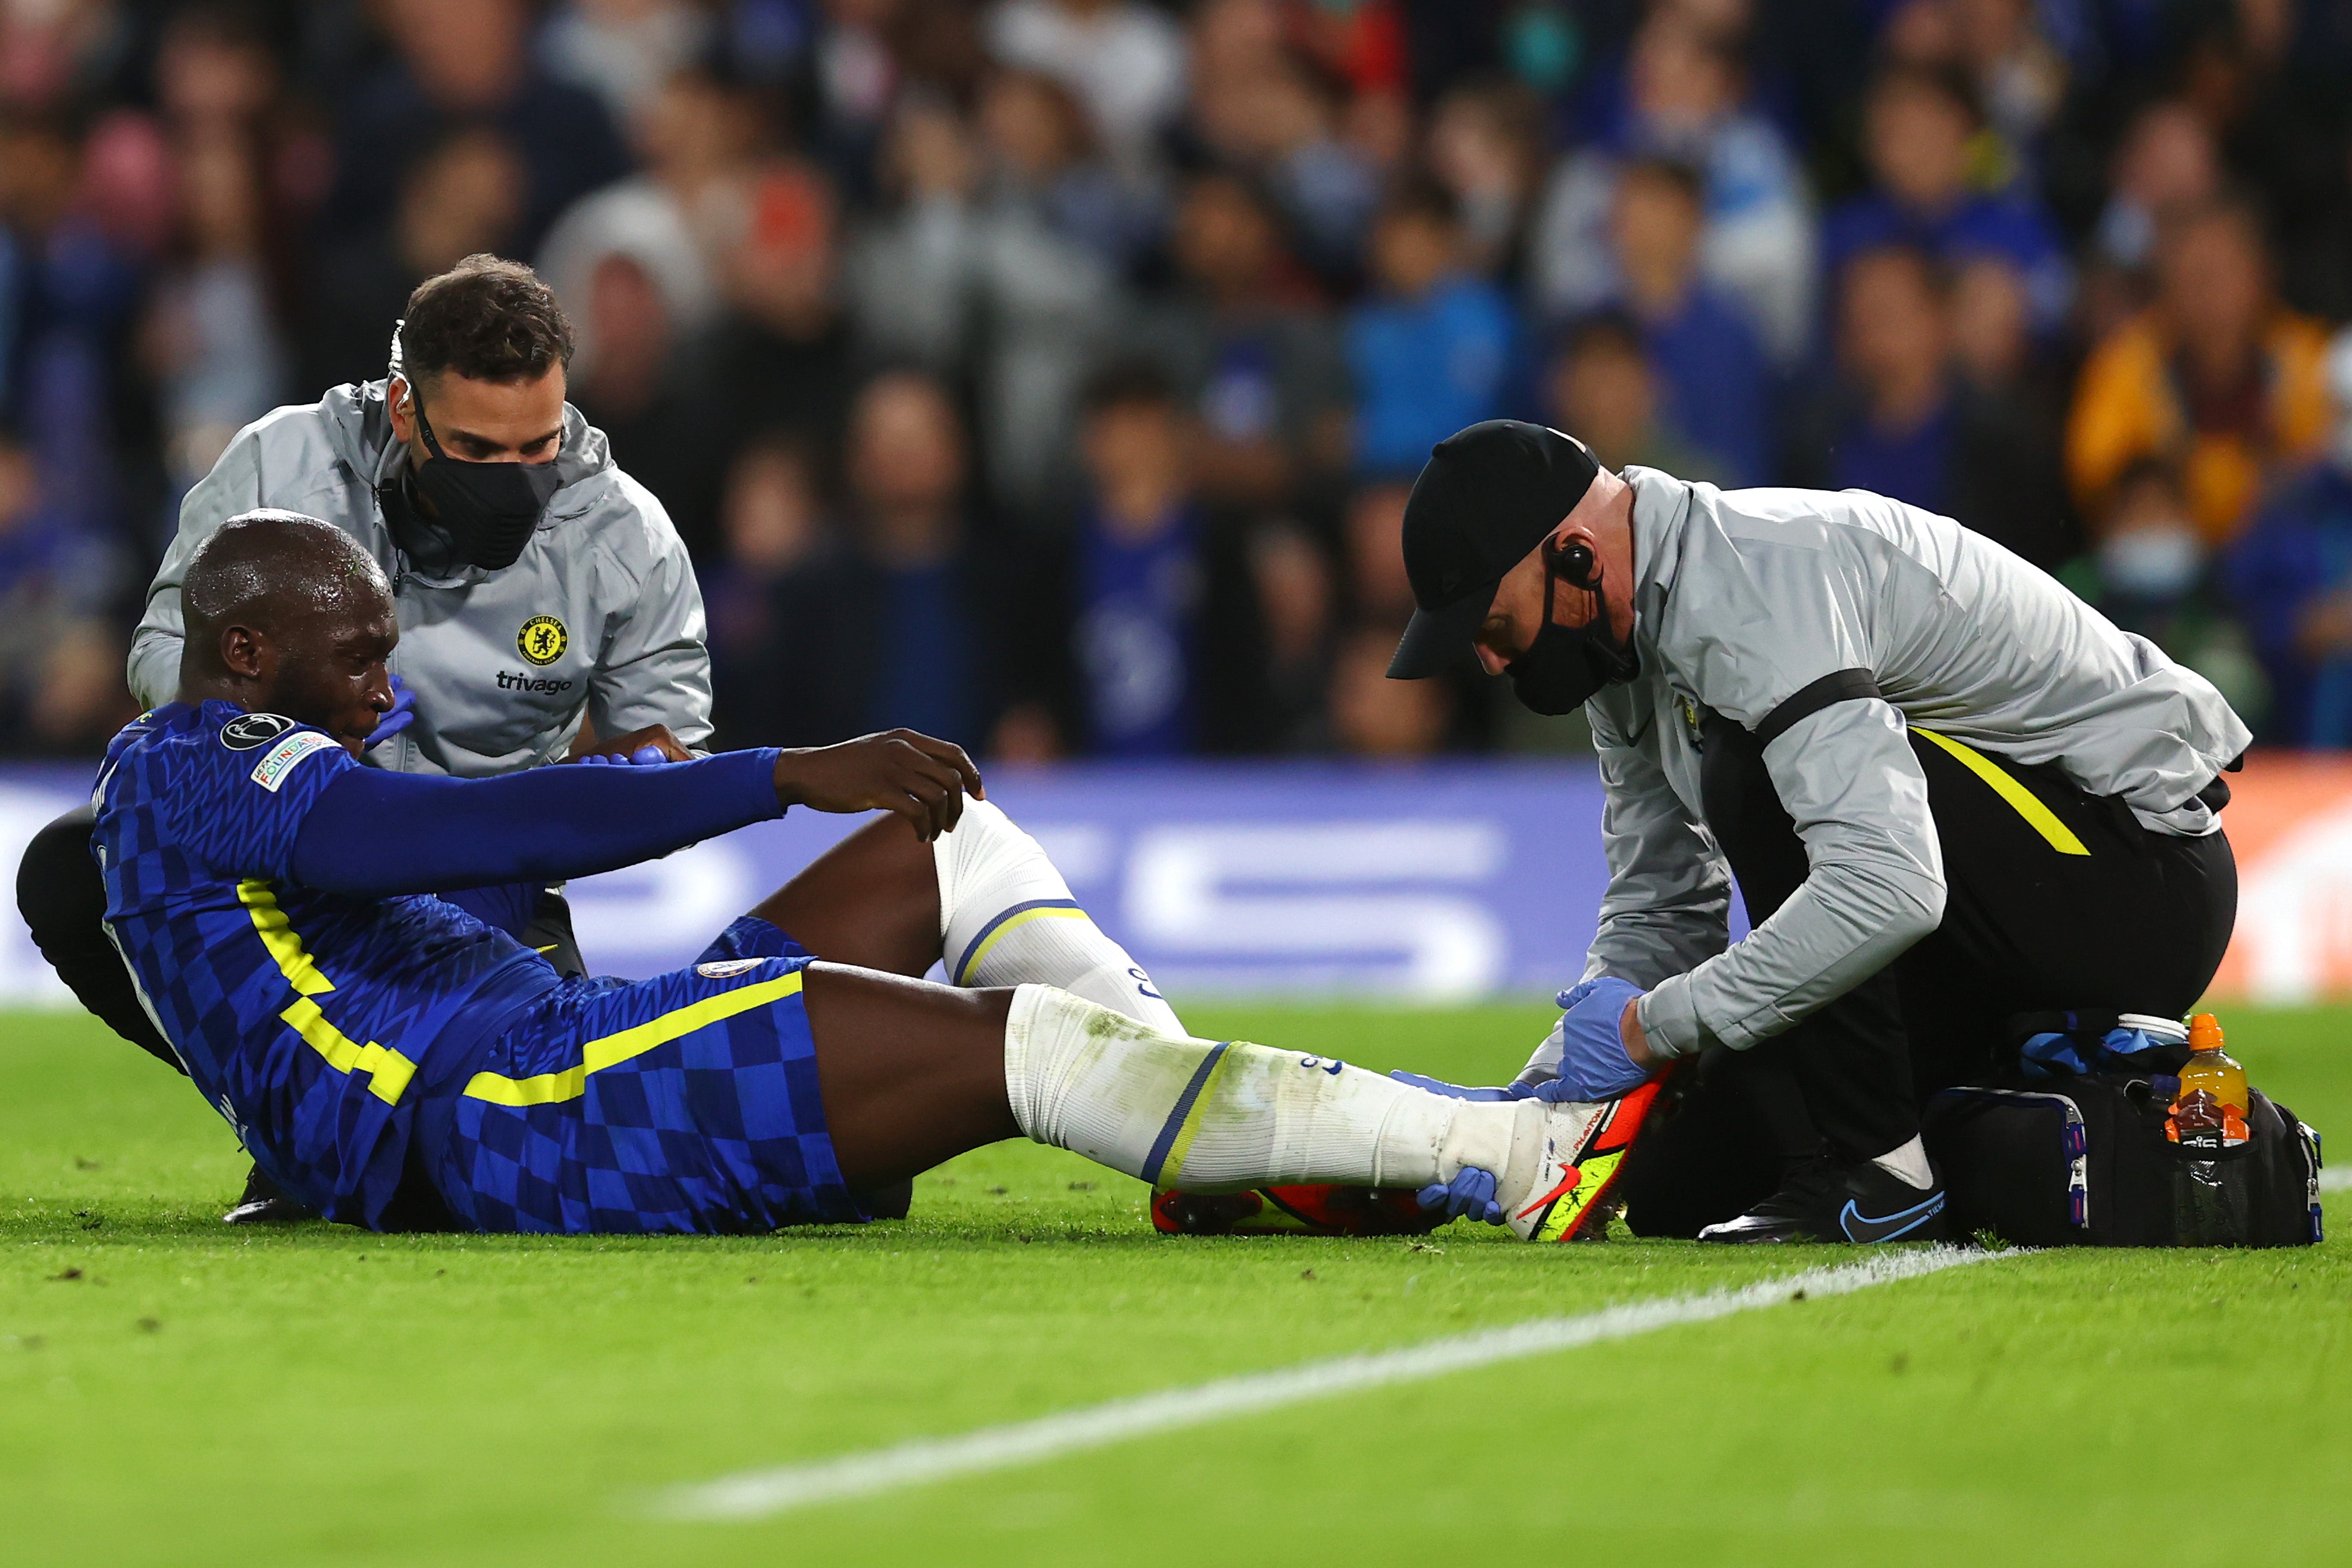 Romelu Lukaku receives treatment before being substituted in the first half